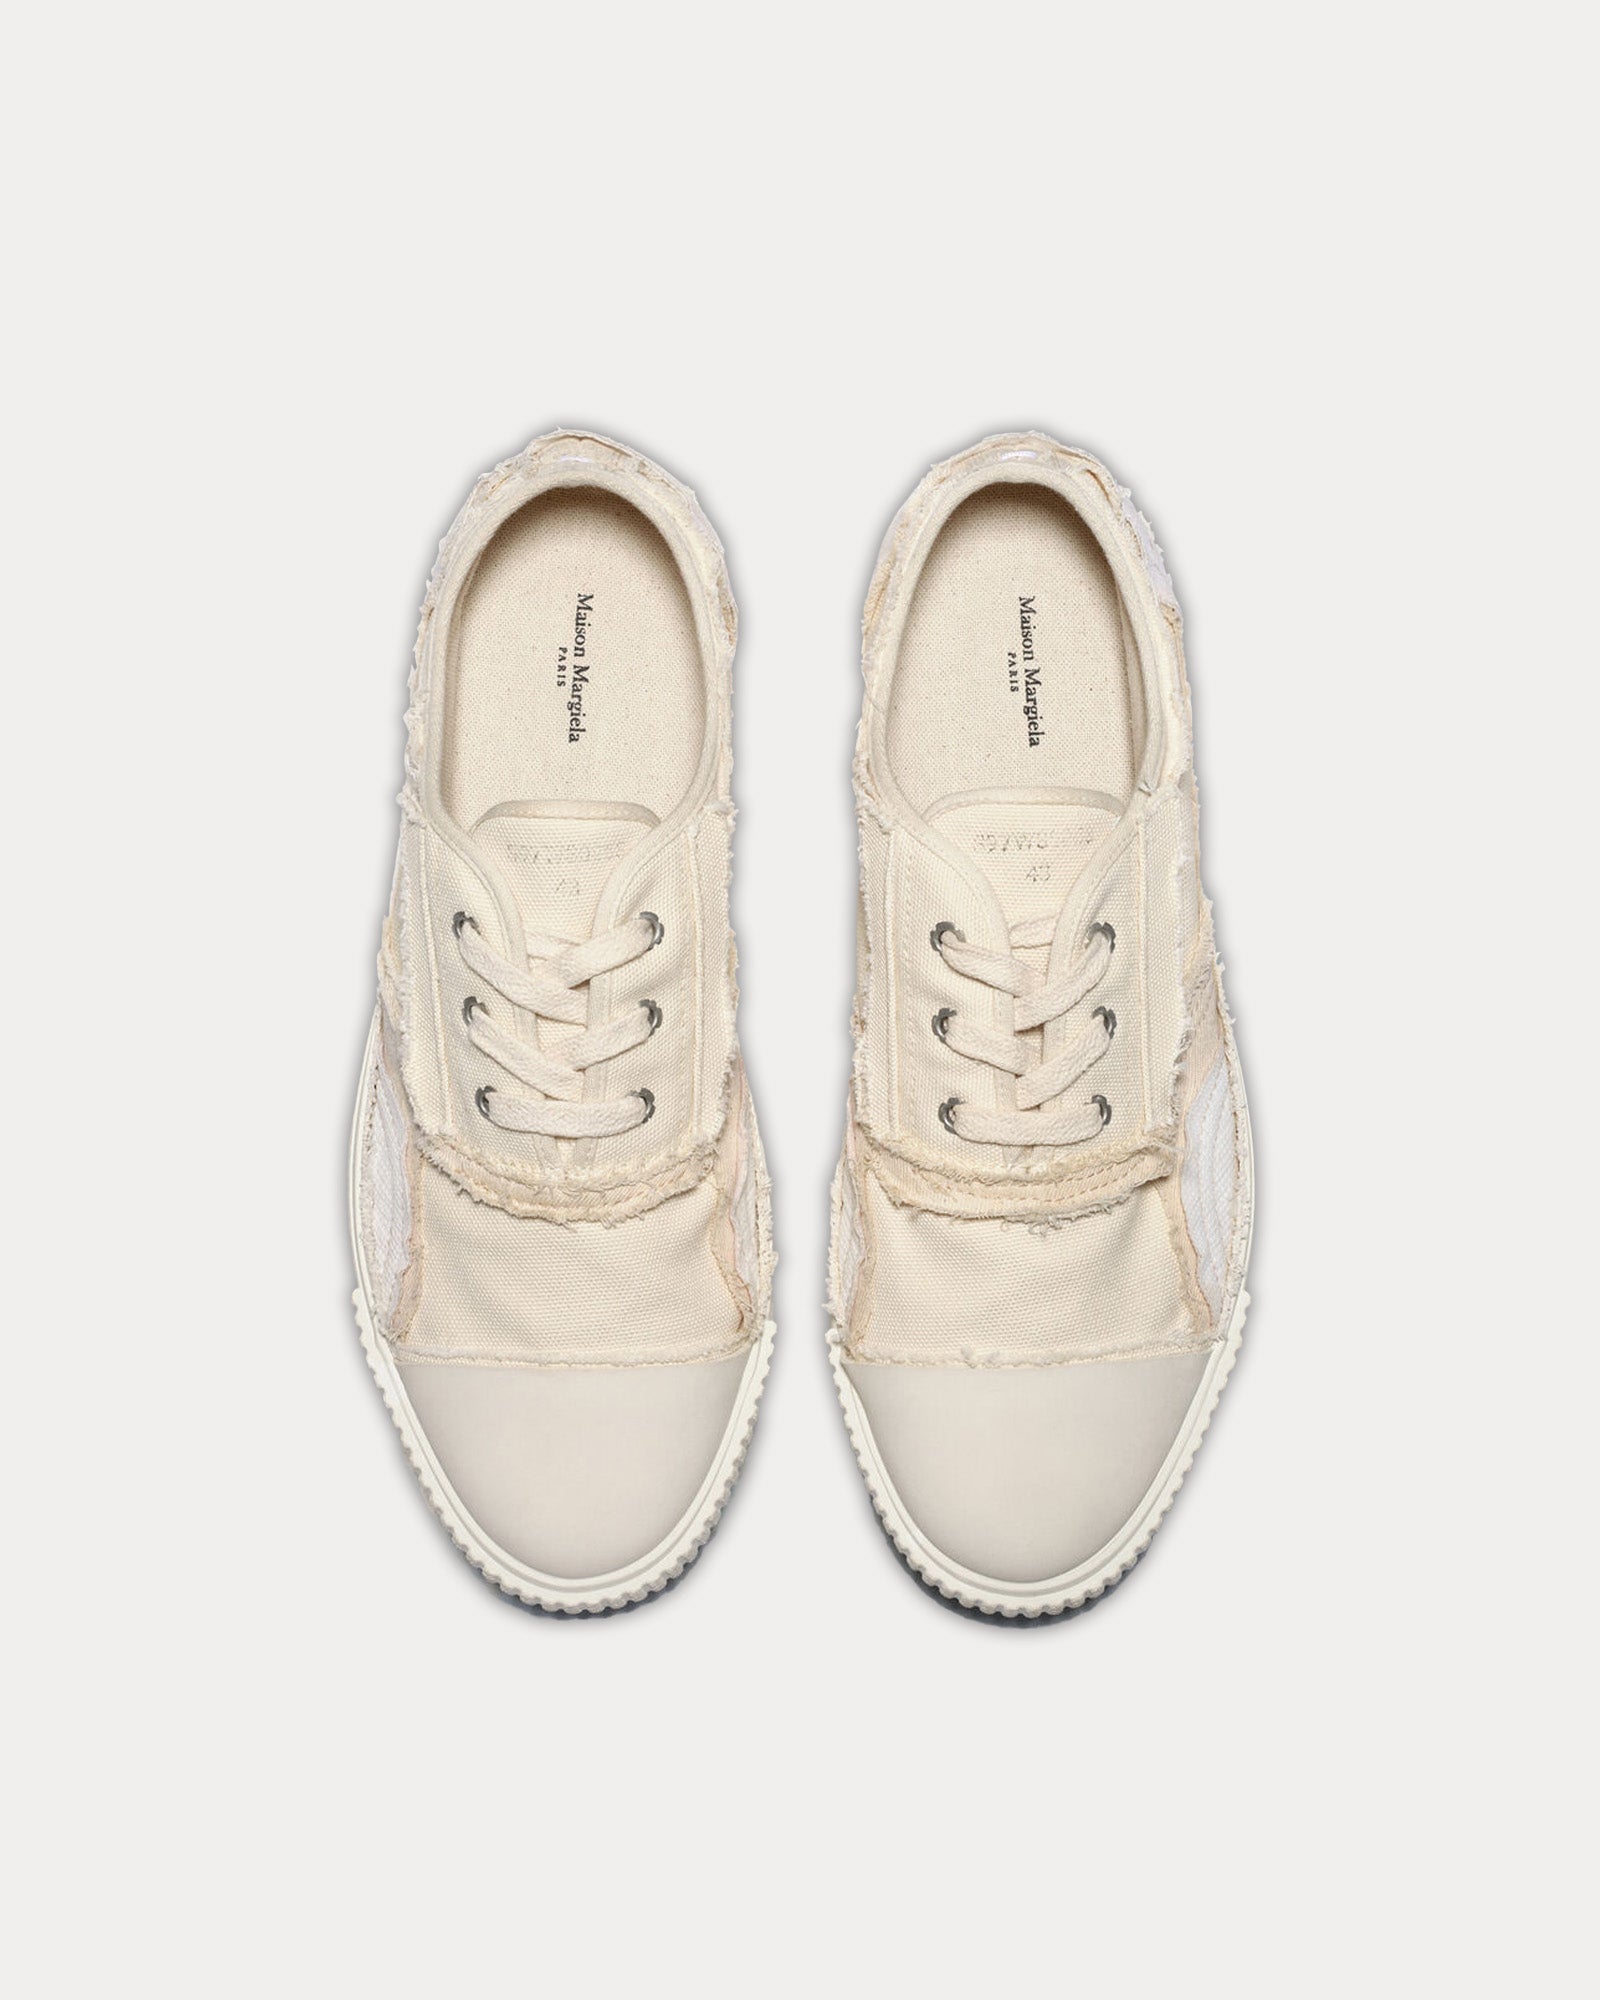 Maison Margiela - Inside-Out Canvas Natural Mix Low Top Sneakers